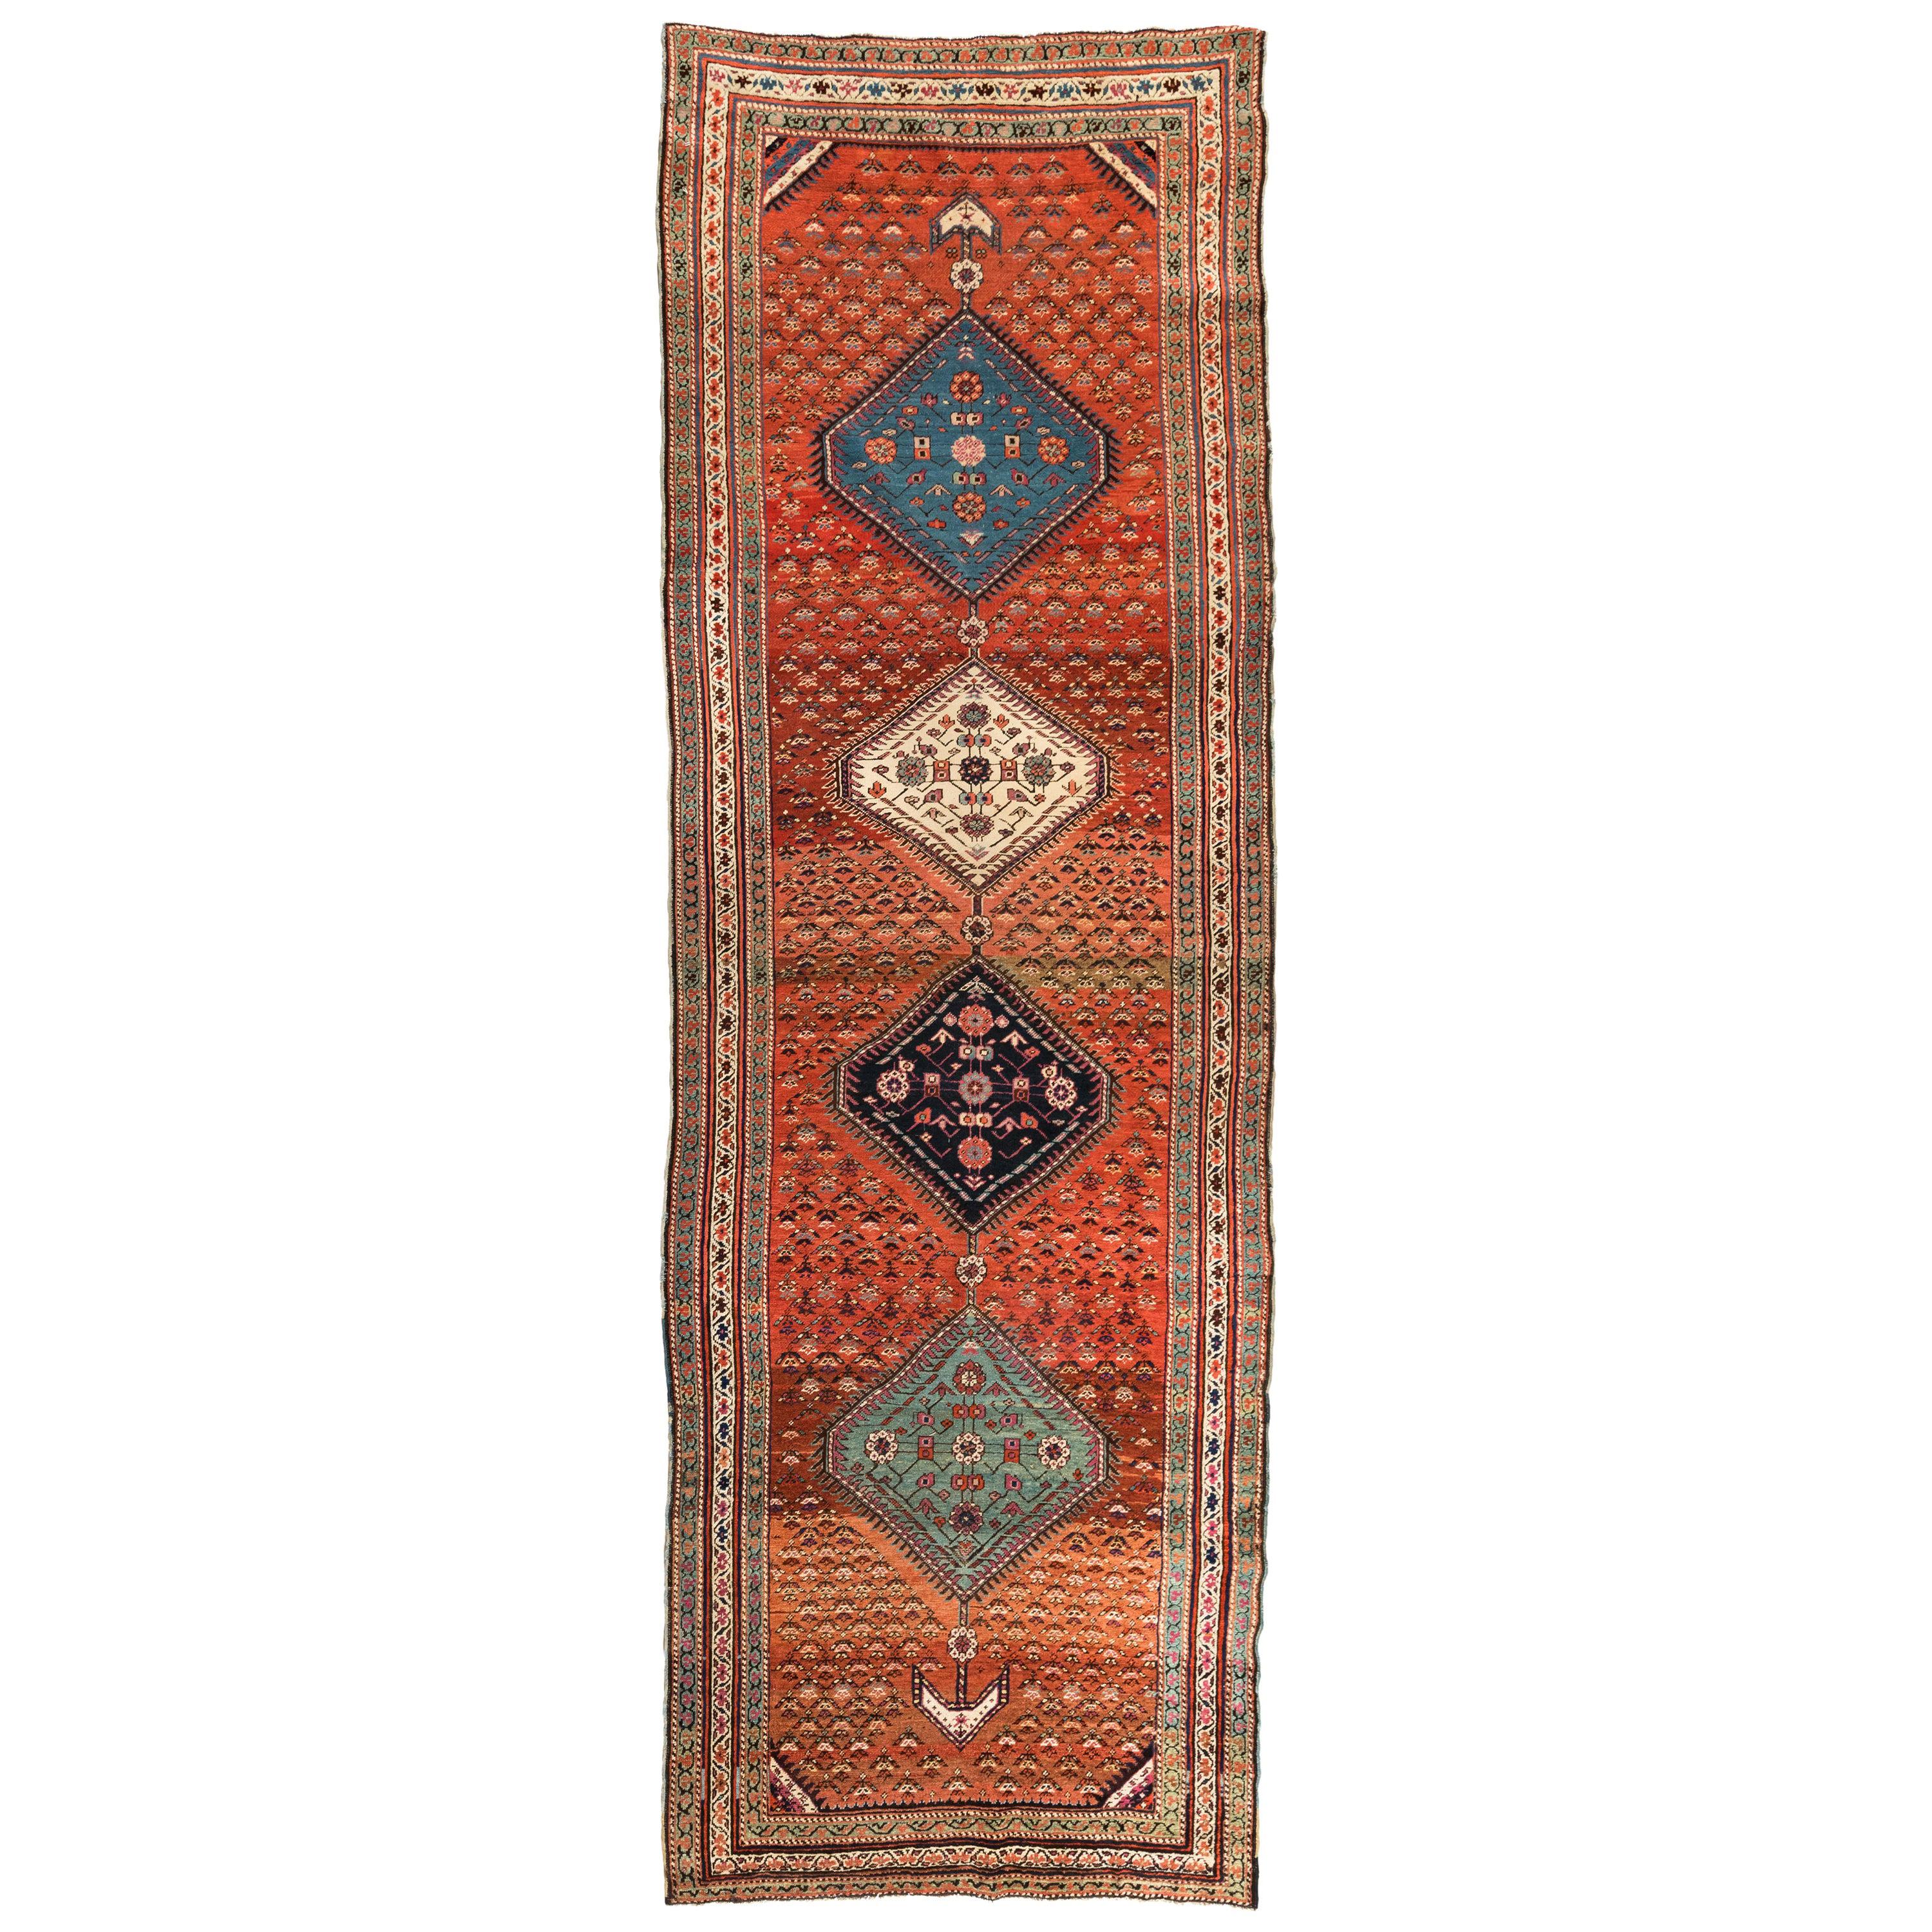 Antique Caucasian Geometric Rust and Blue Karabagh Runner Rug circa 1900-1910s For Sale